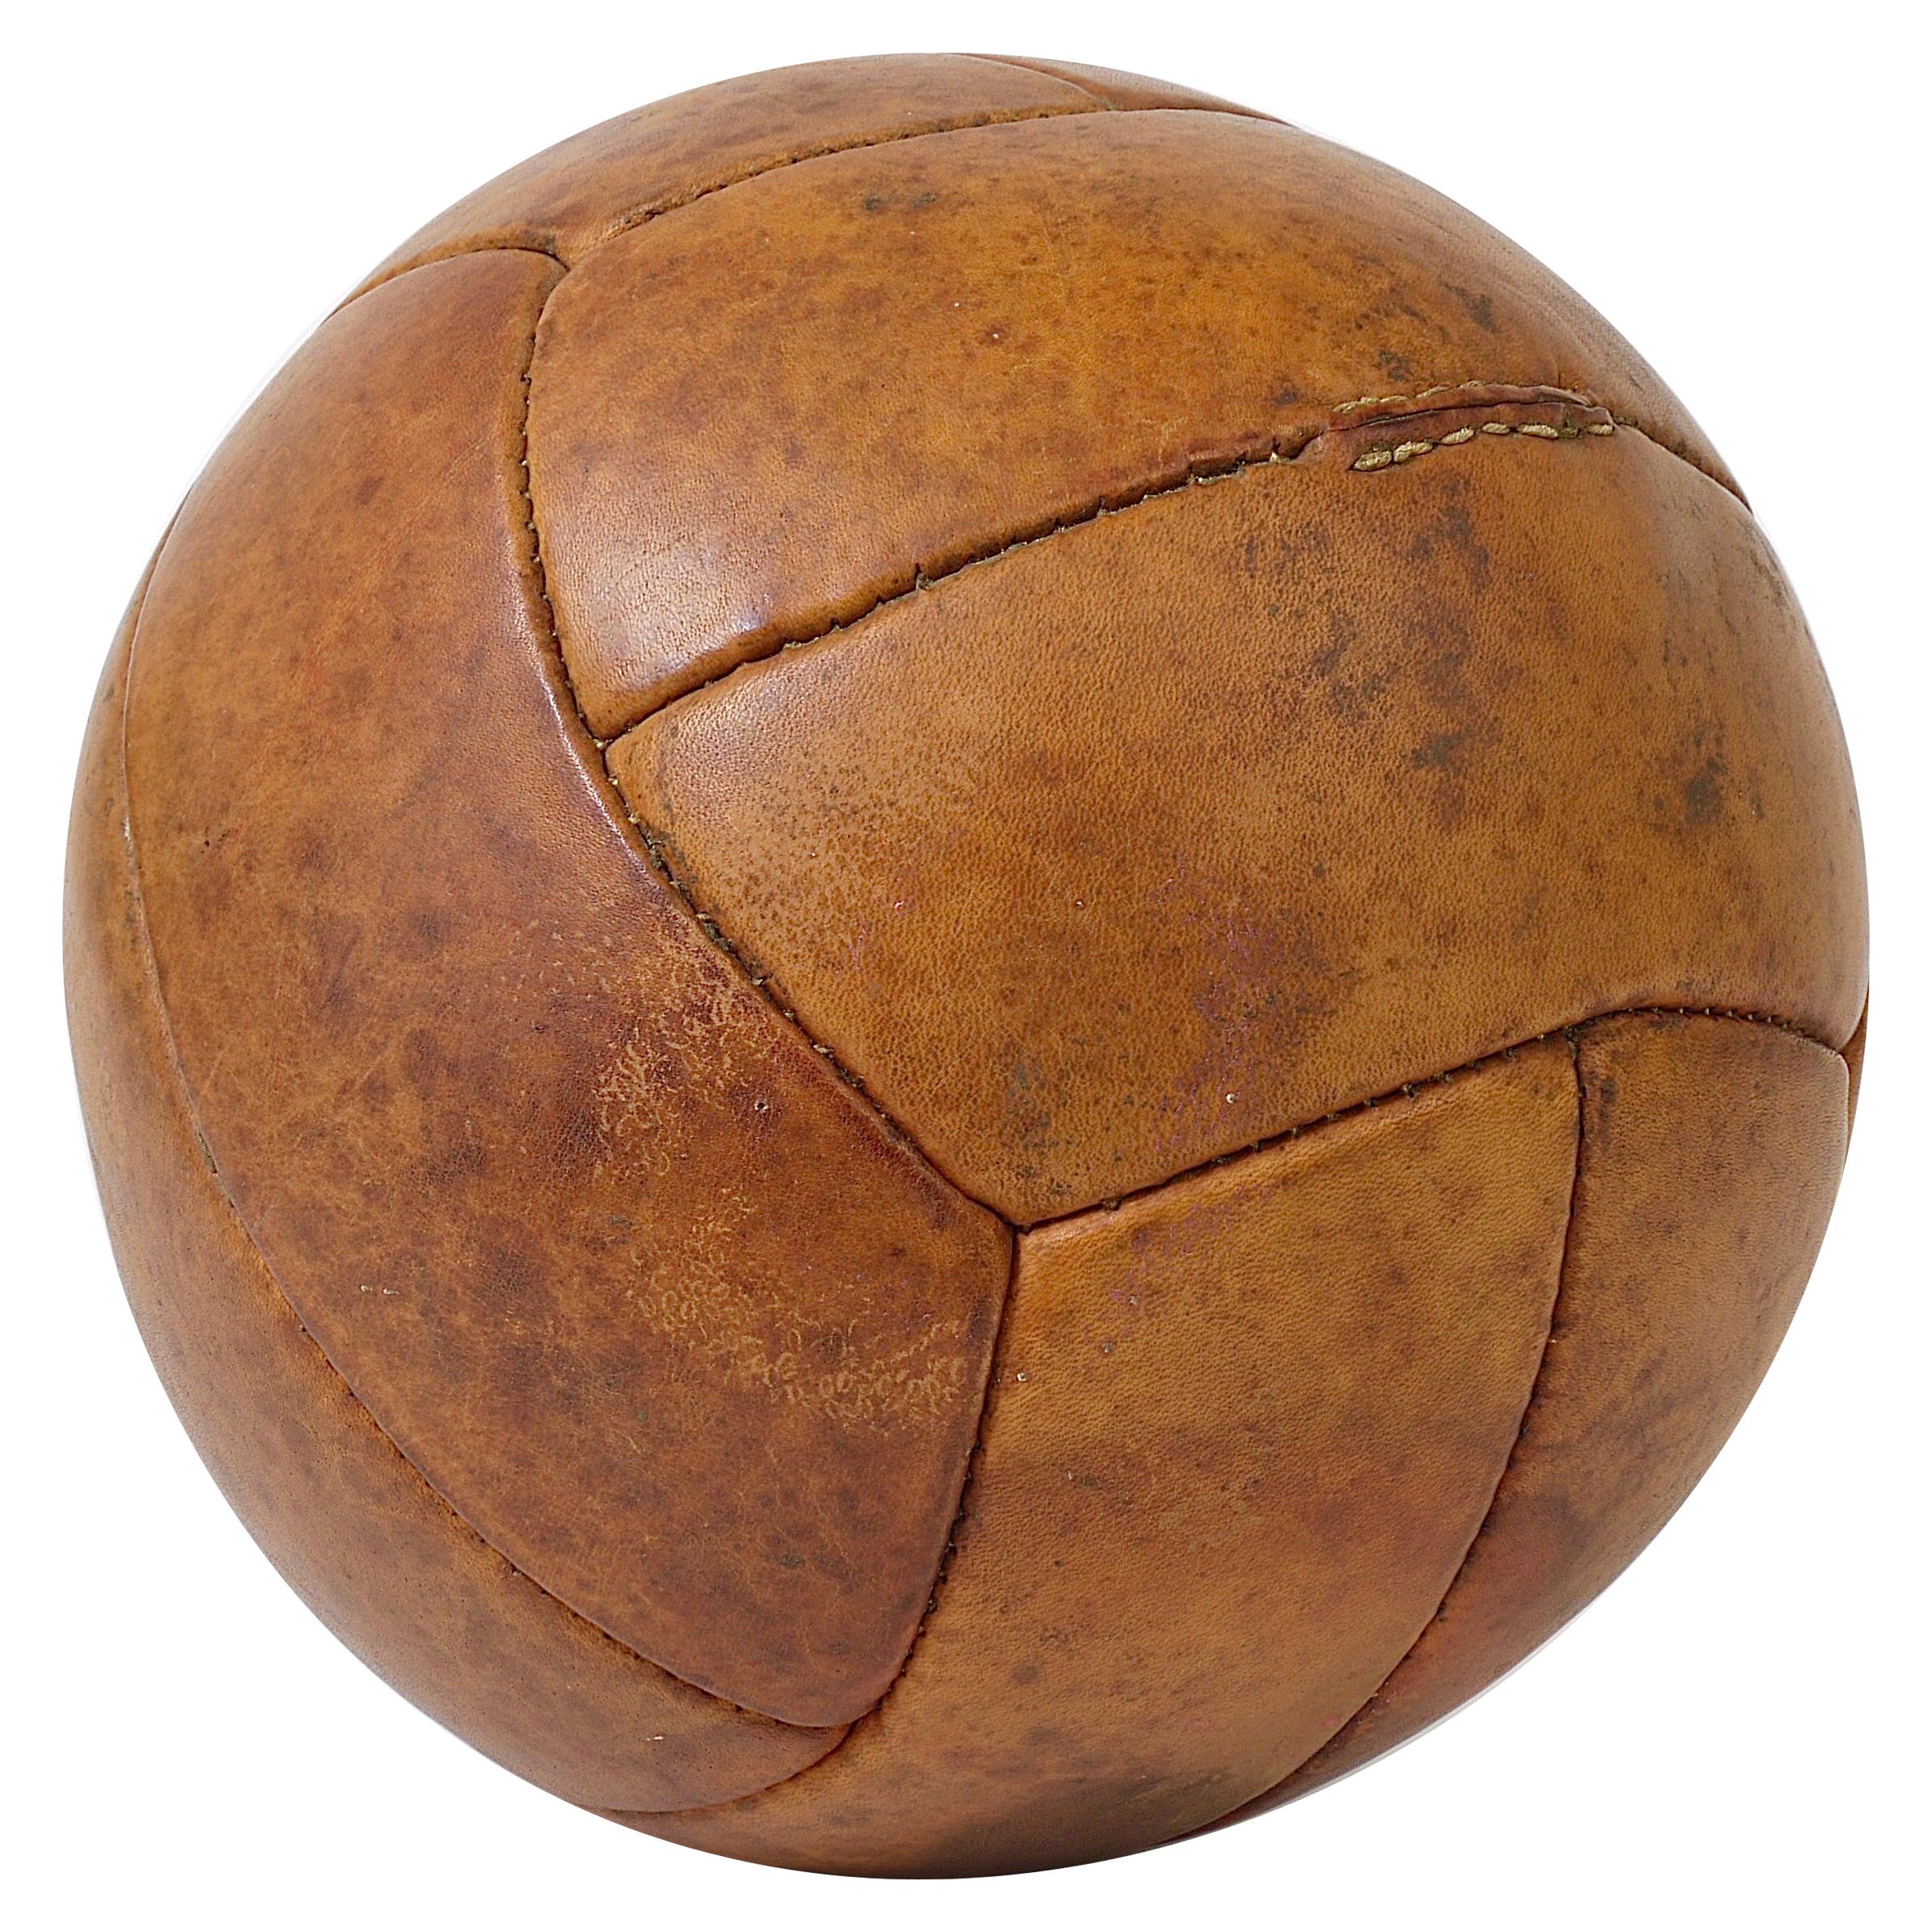 Vintage 1930s Tan Leather Medicine Ball from a Gym, Czech Republic, 1930s